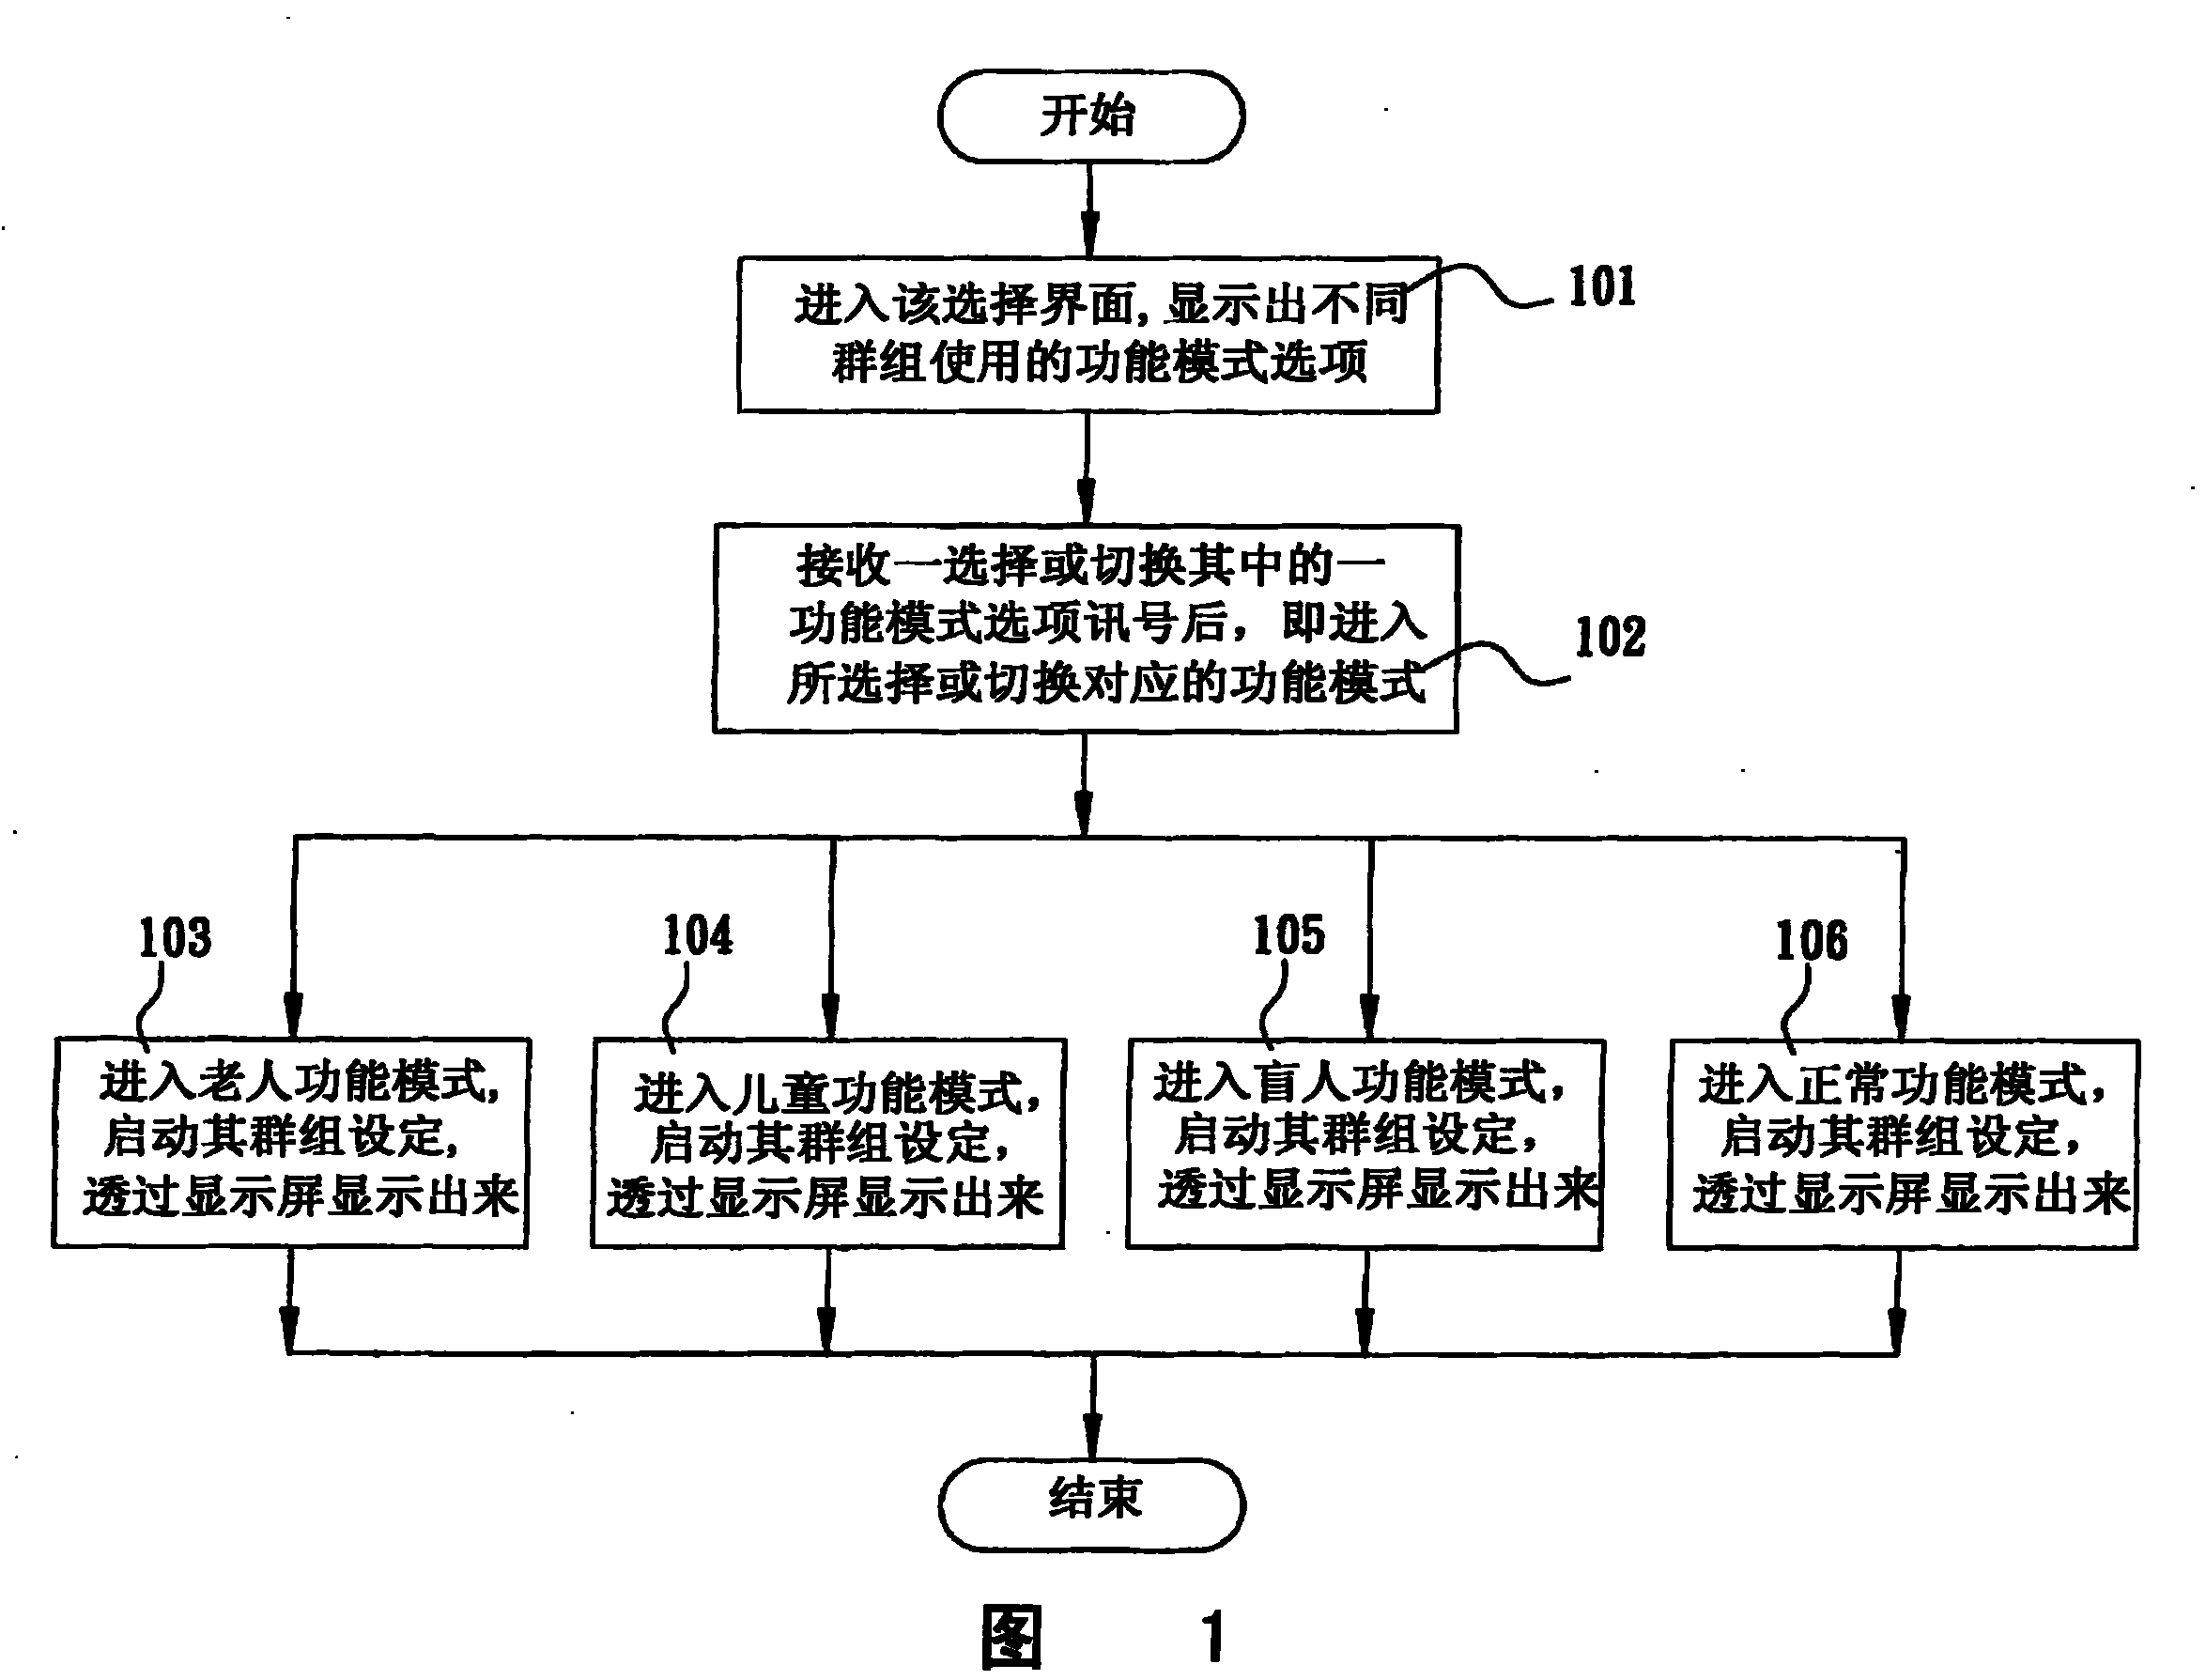 Functional mode switching method for providing different group use in cell phone